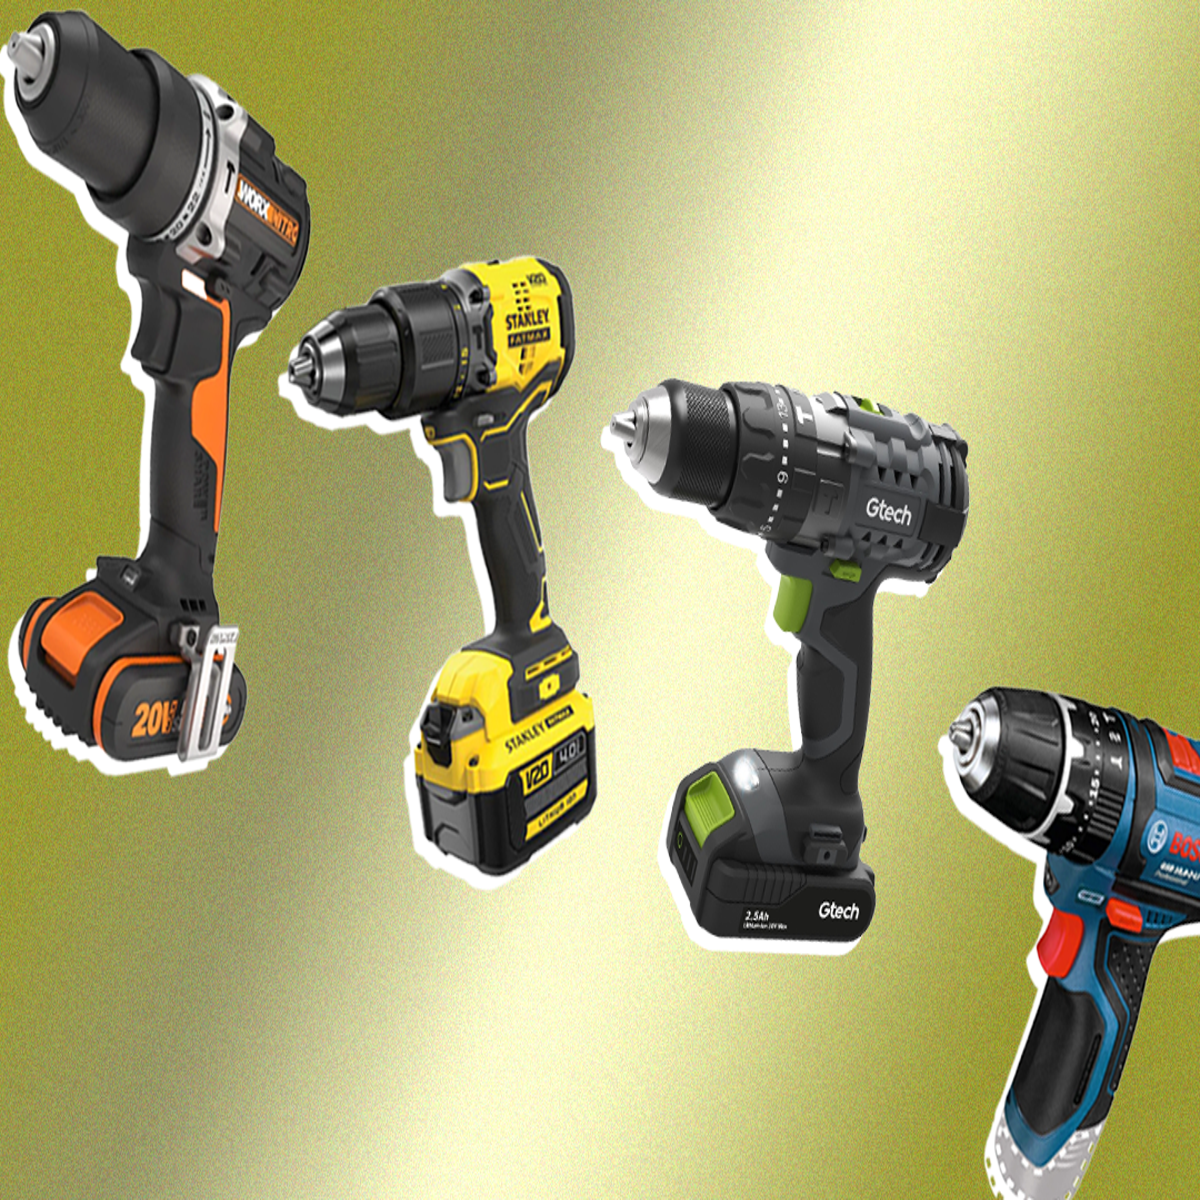 https://static.independent.co.uk/2023/10/03/12/Cordless%20drills%20and%20drivers.png?width=1200&height=1200&fit=crop